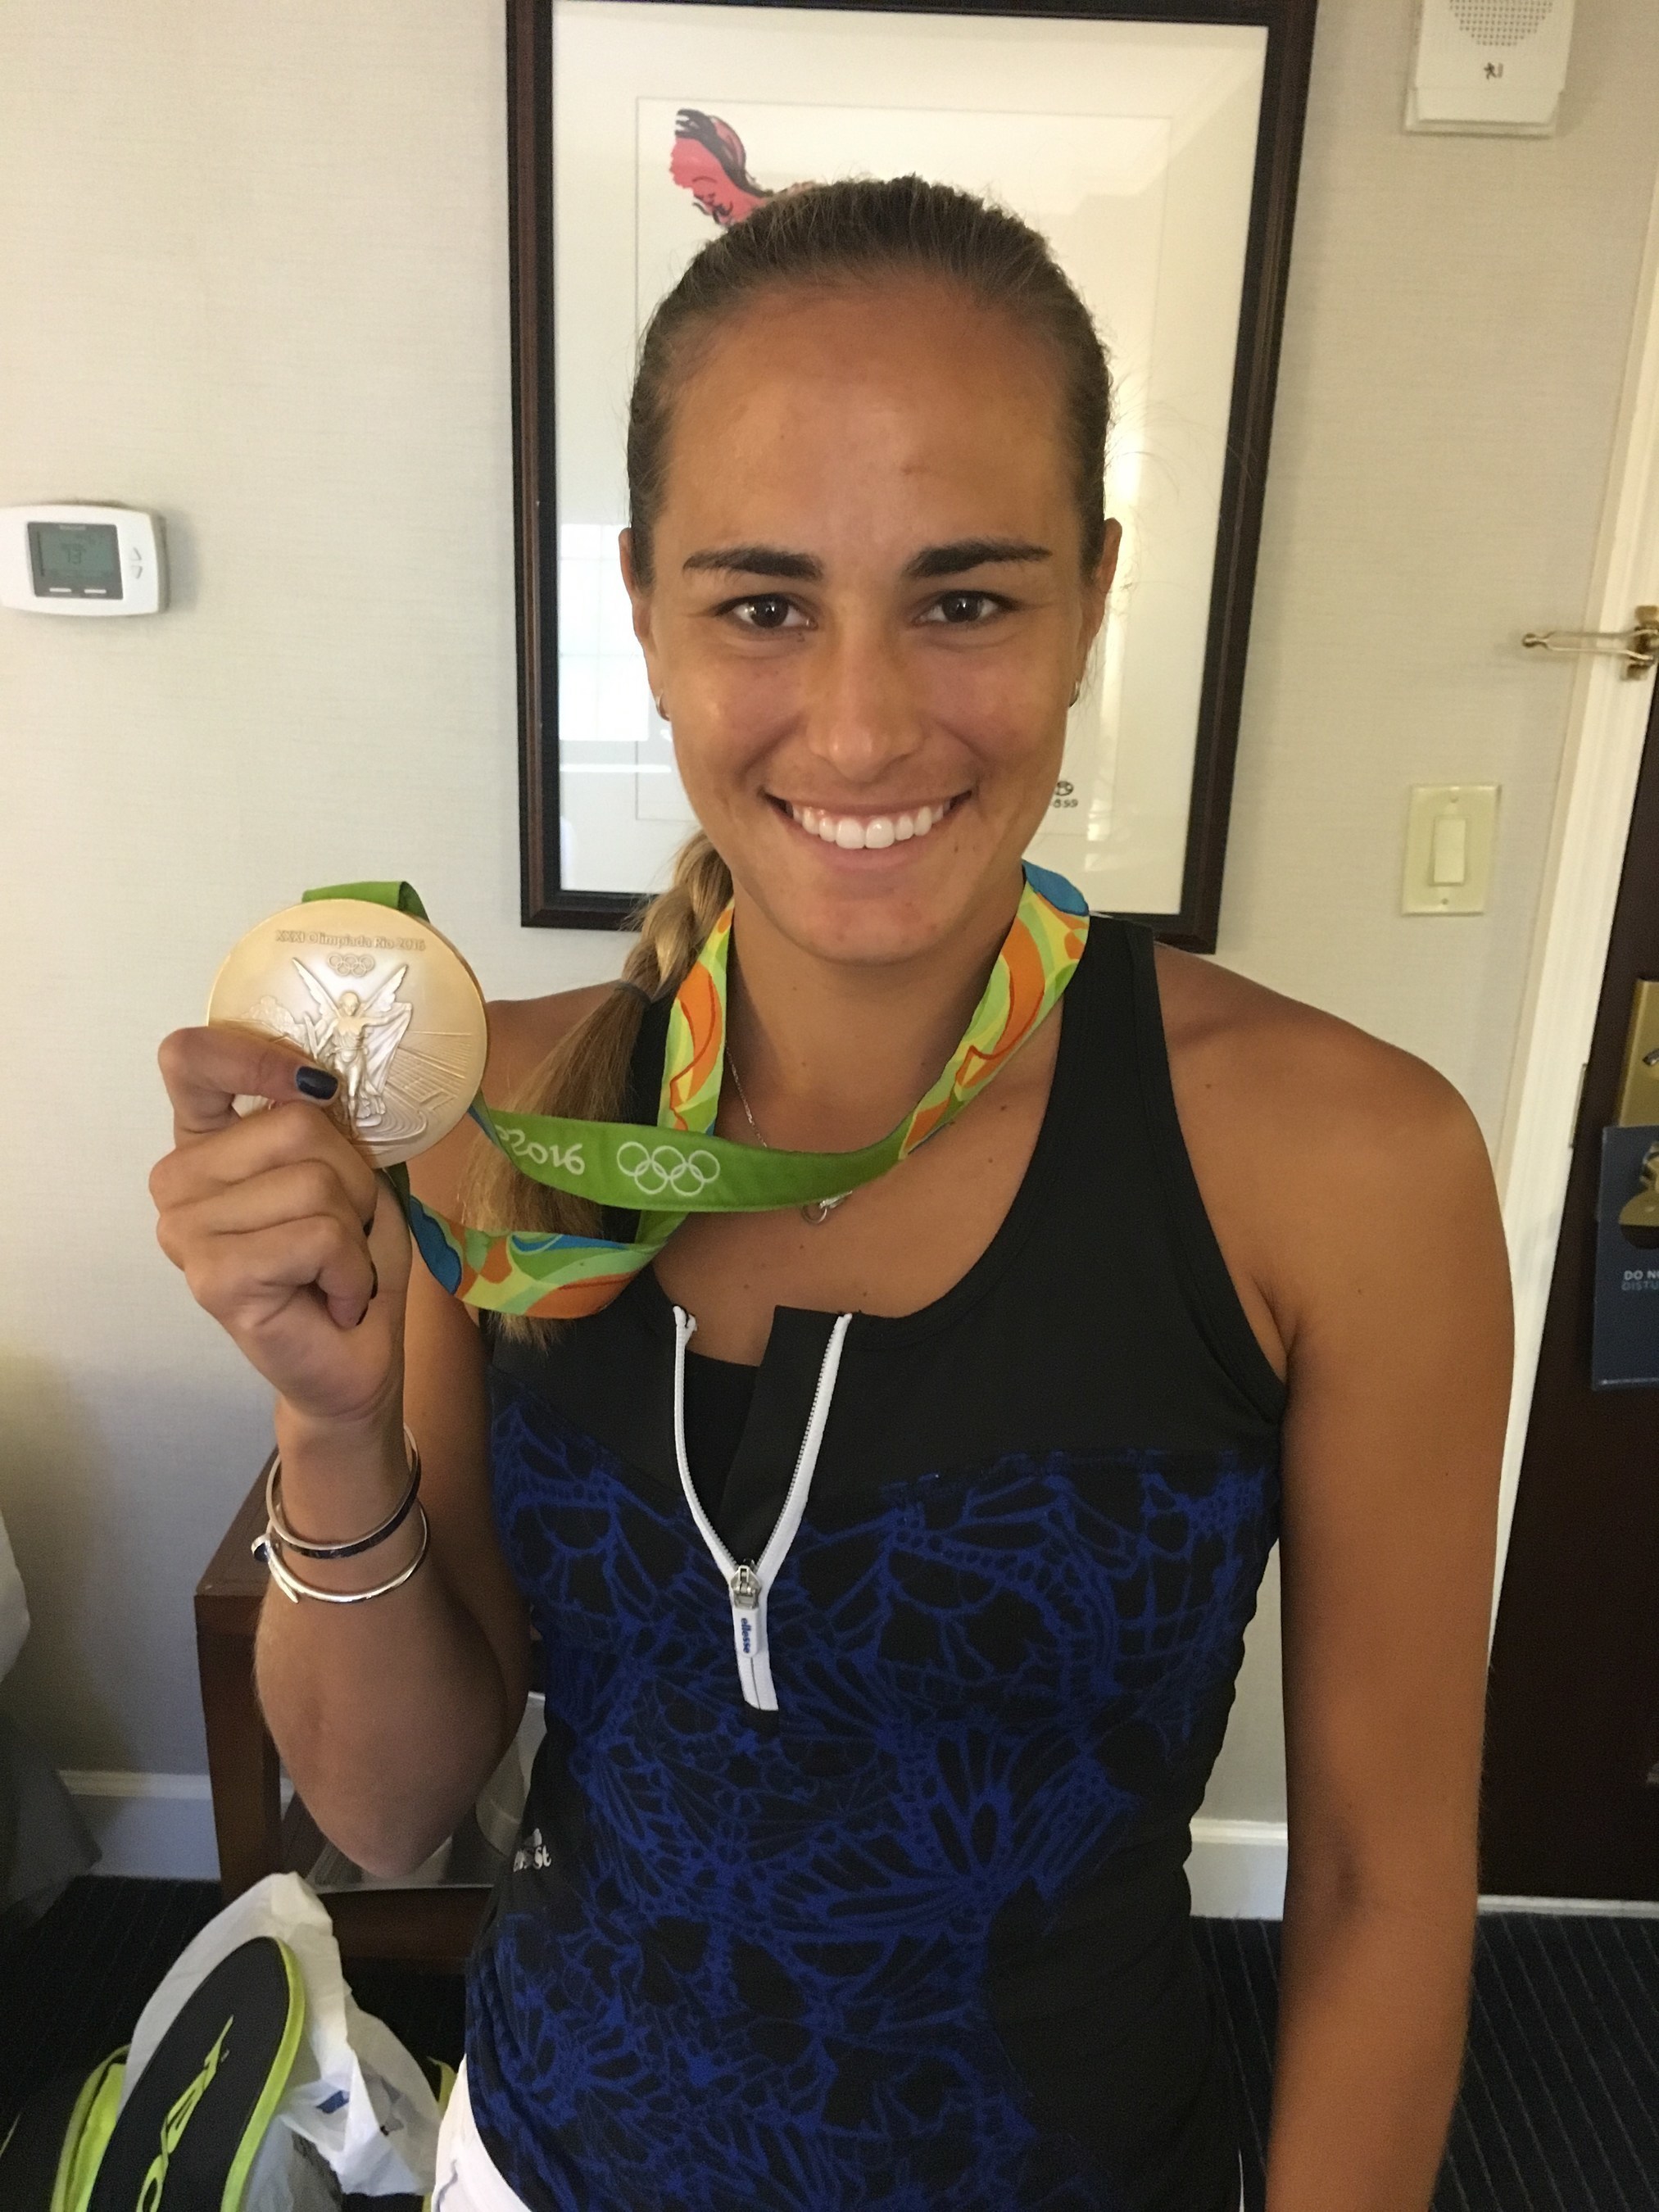 Monica Puig Celebrates her Olympic Gold Medal and urges travelers to visit her homeland. (Photo Credit: Puerto Rico Tourism Company)